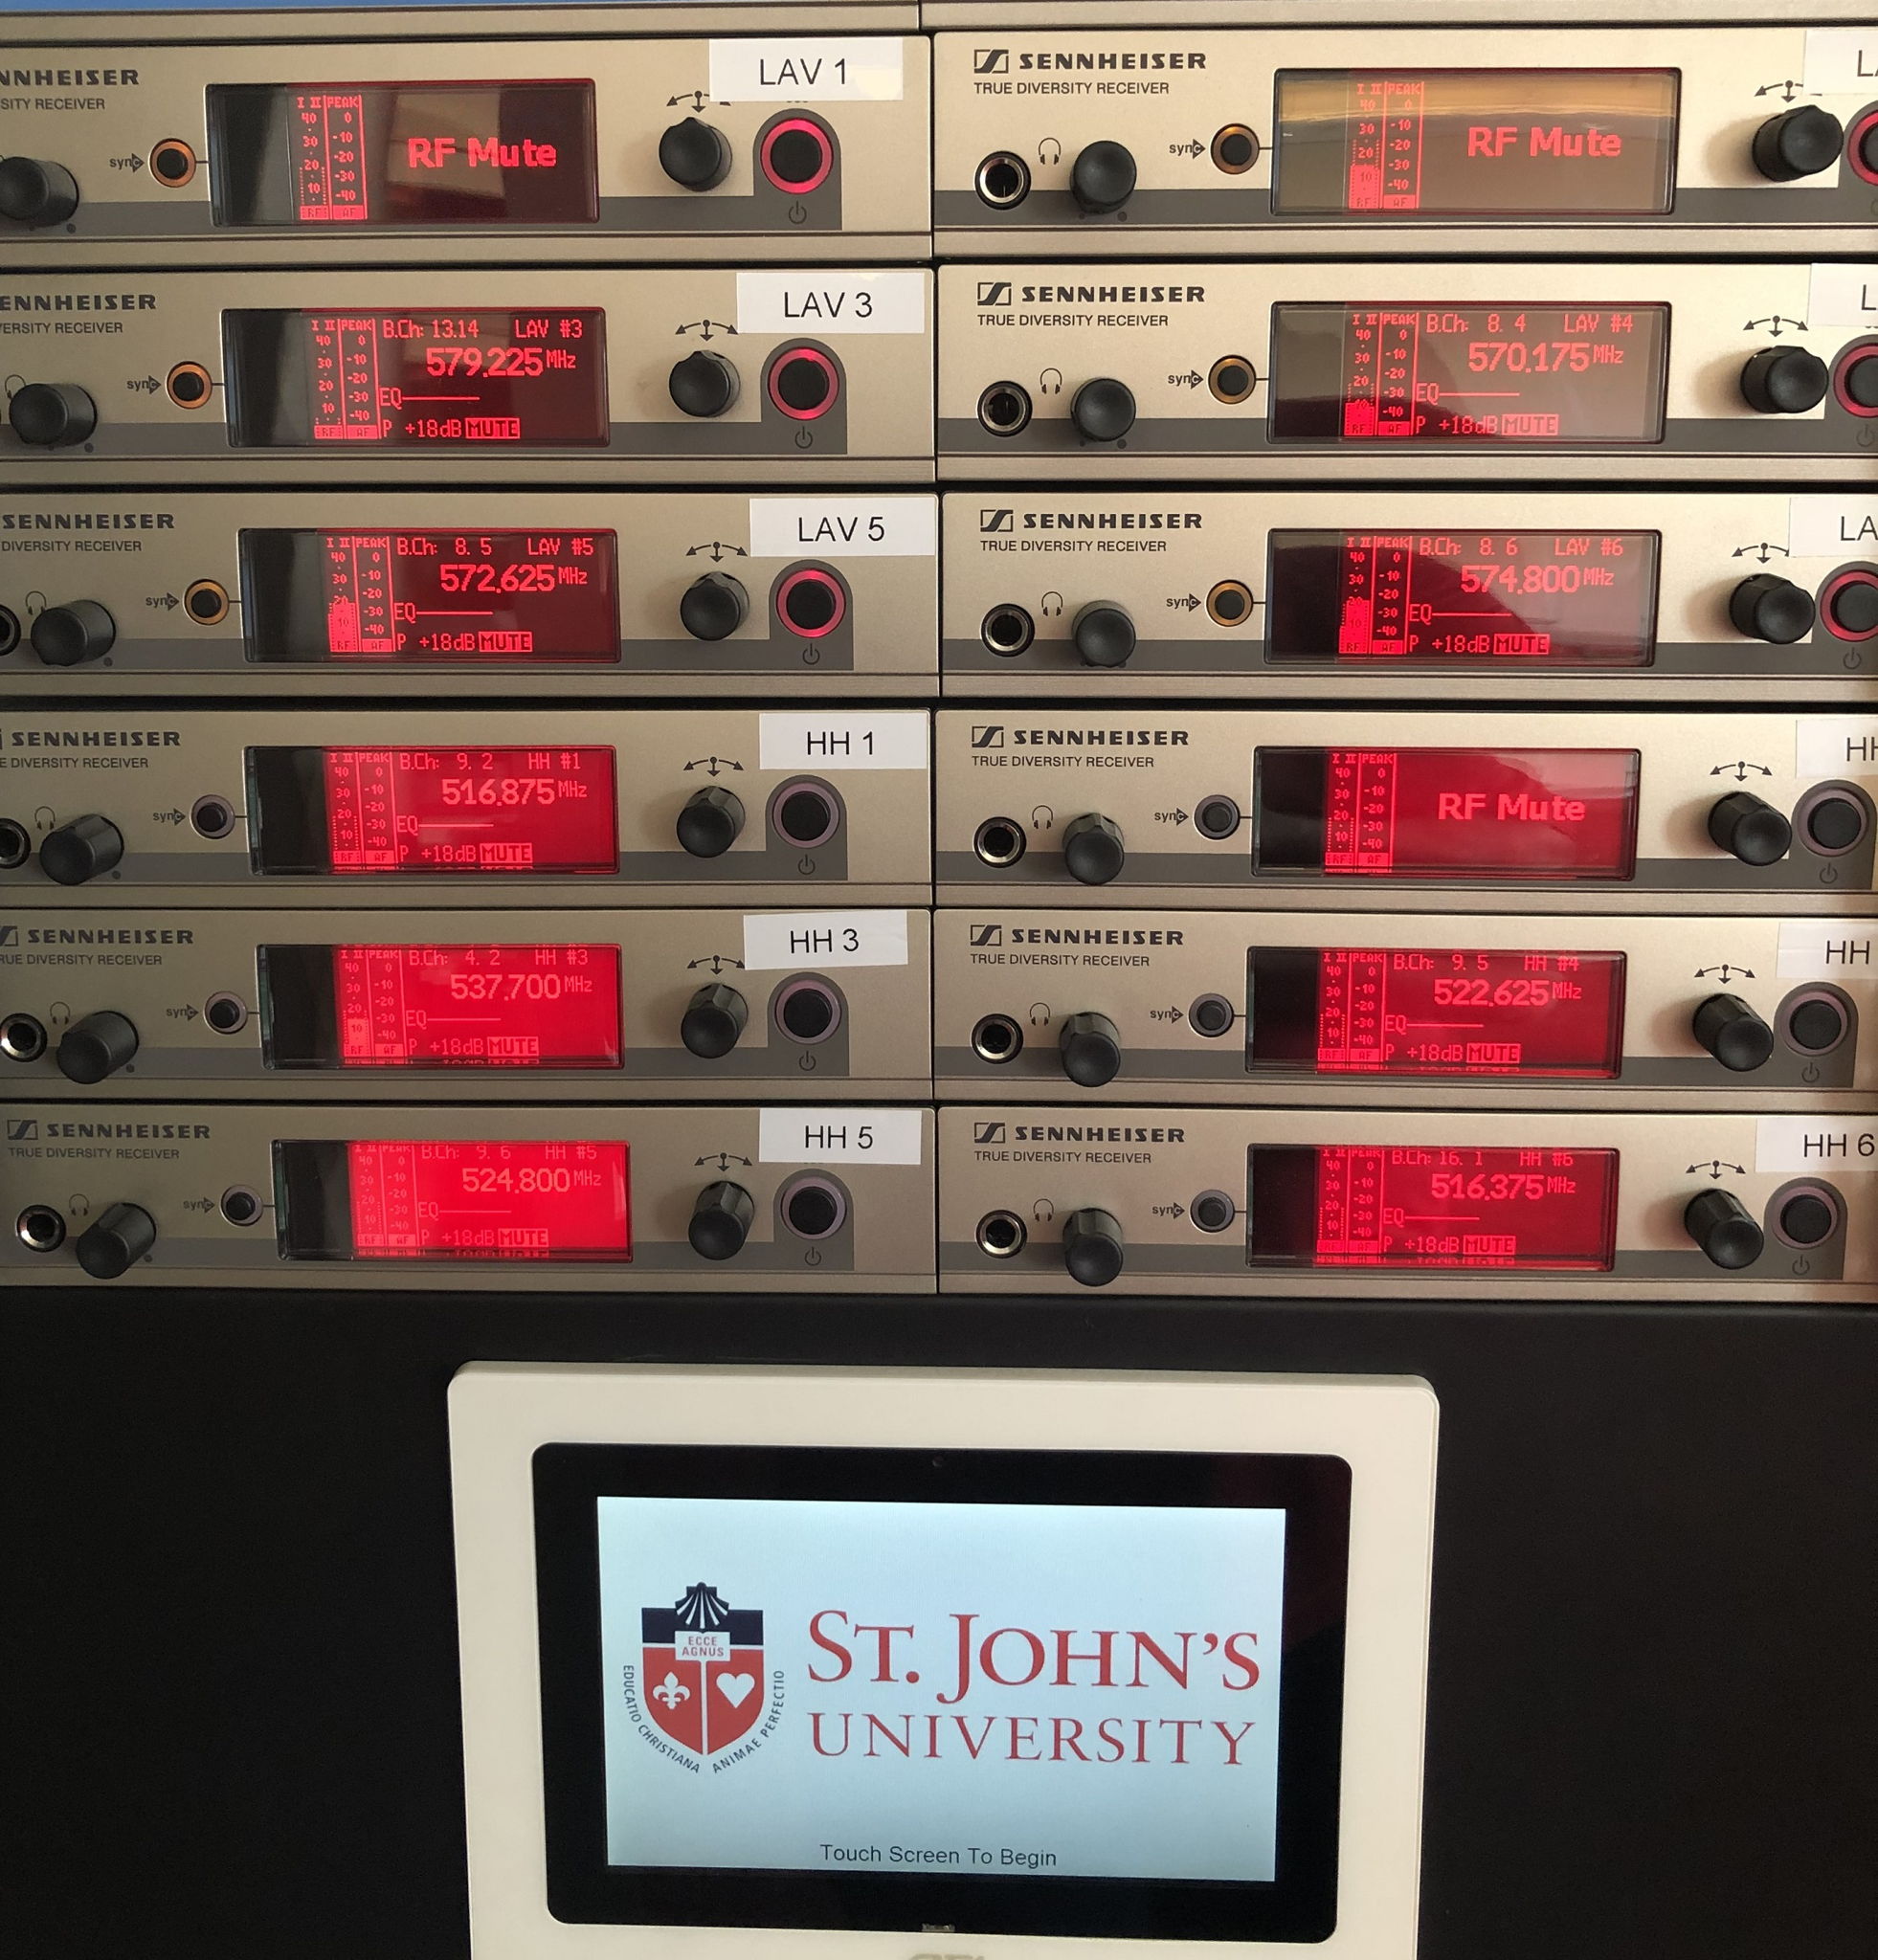 By using the Sennheiser Control Cockpit software, St. John’s University is able to remotely monitor and manage its networked audio devices.
(Image courtesy of St. John’s University